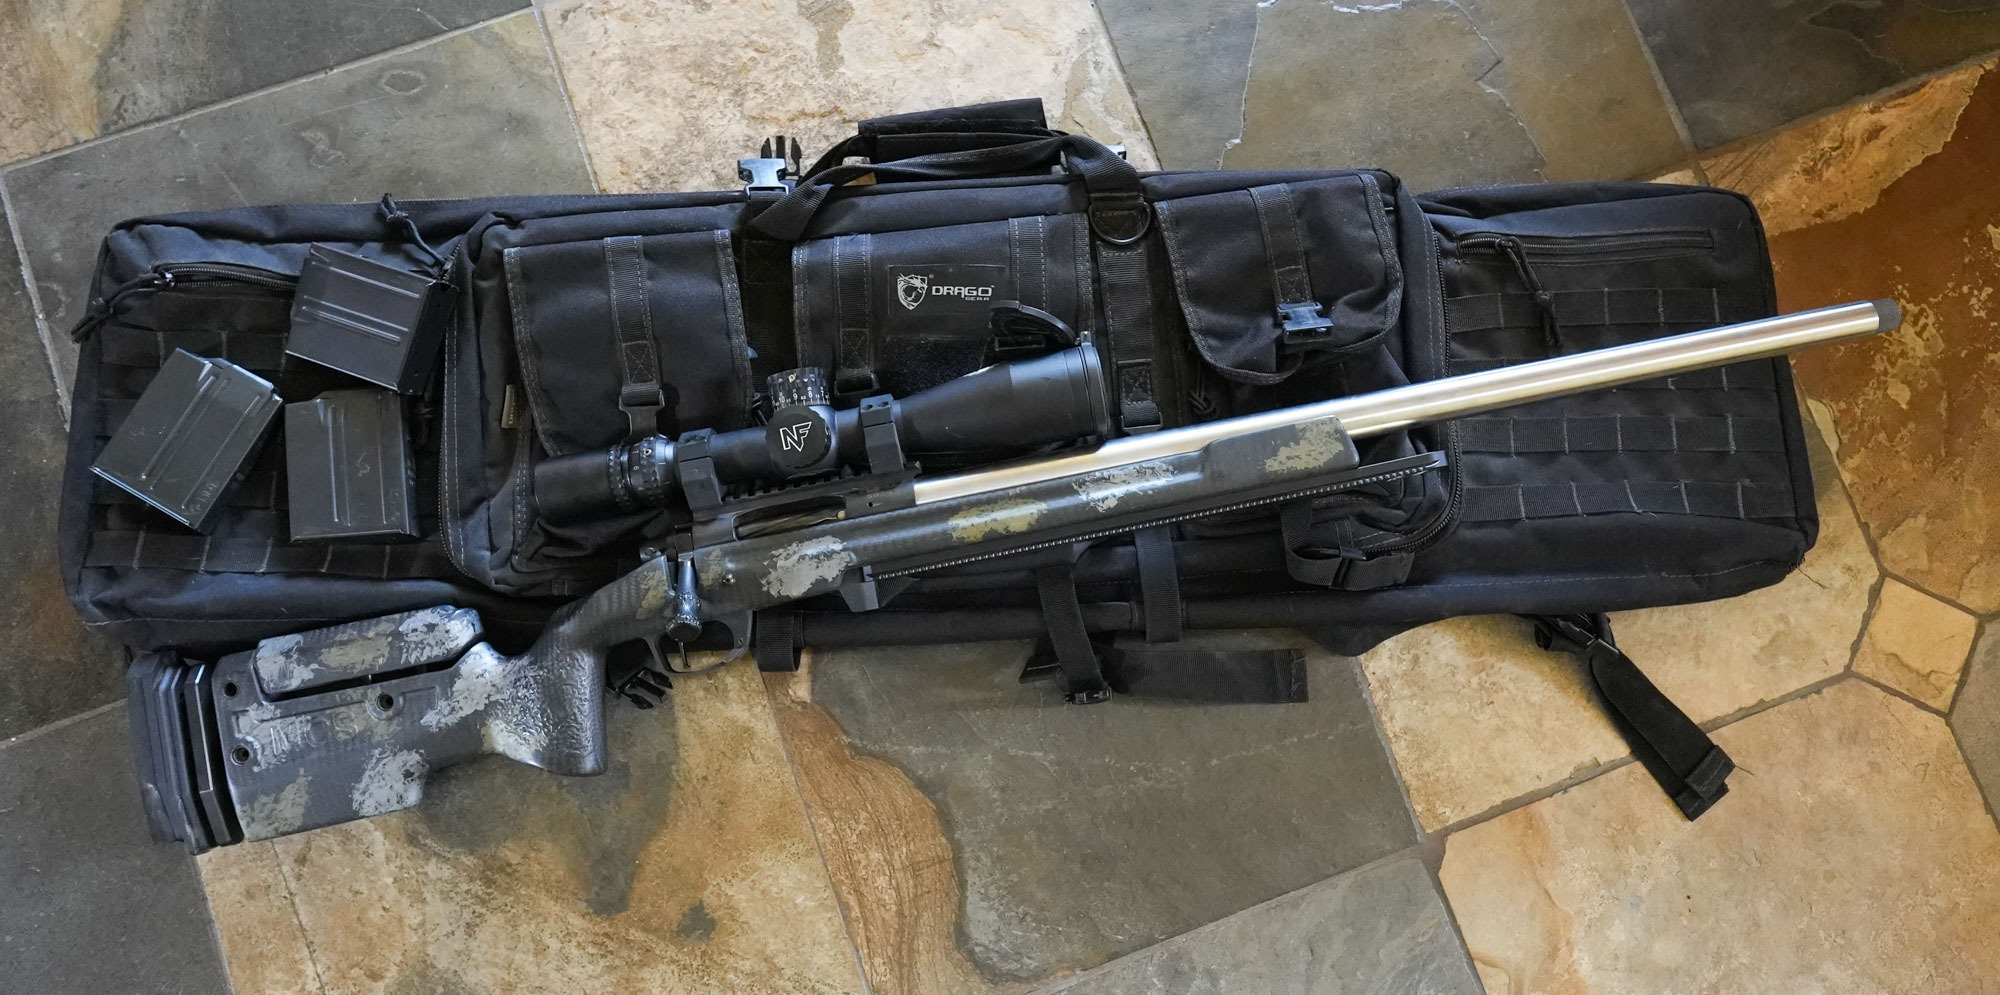 A rifle sits on the Draco rifle case.